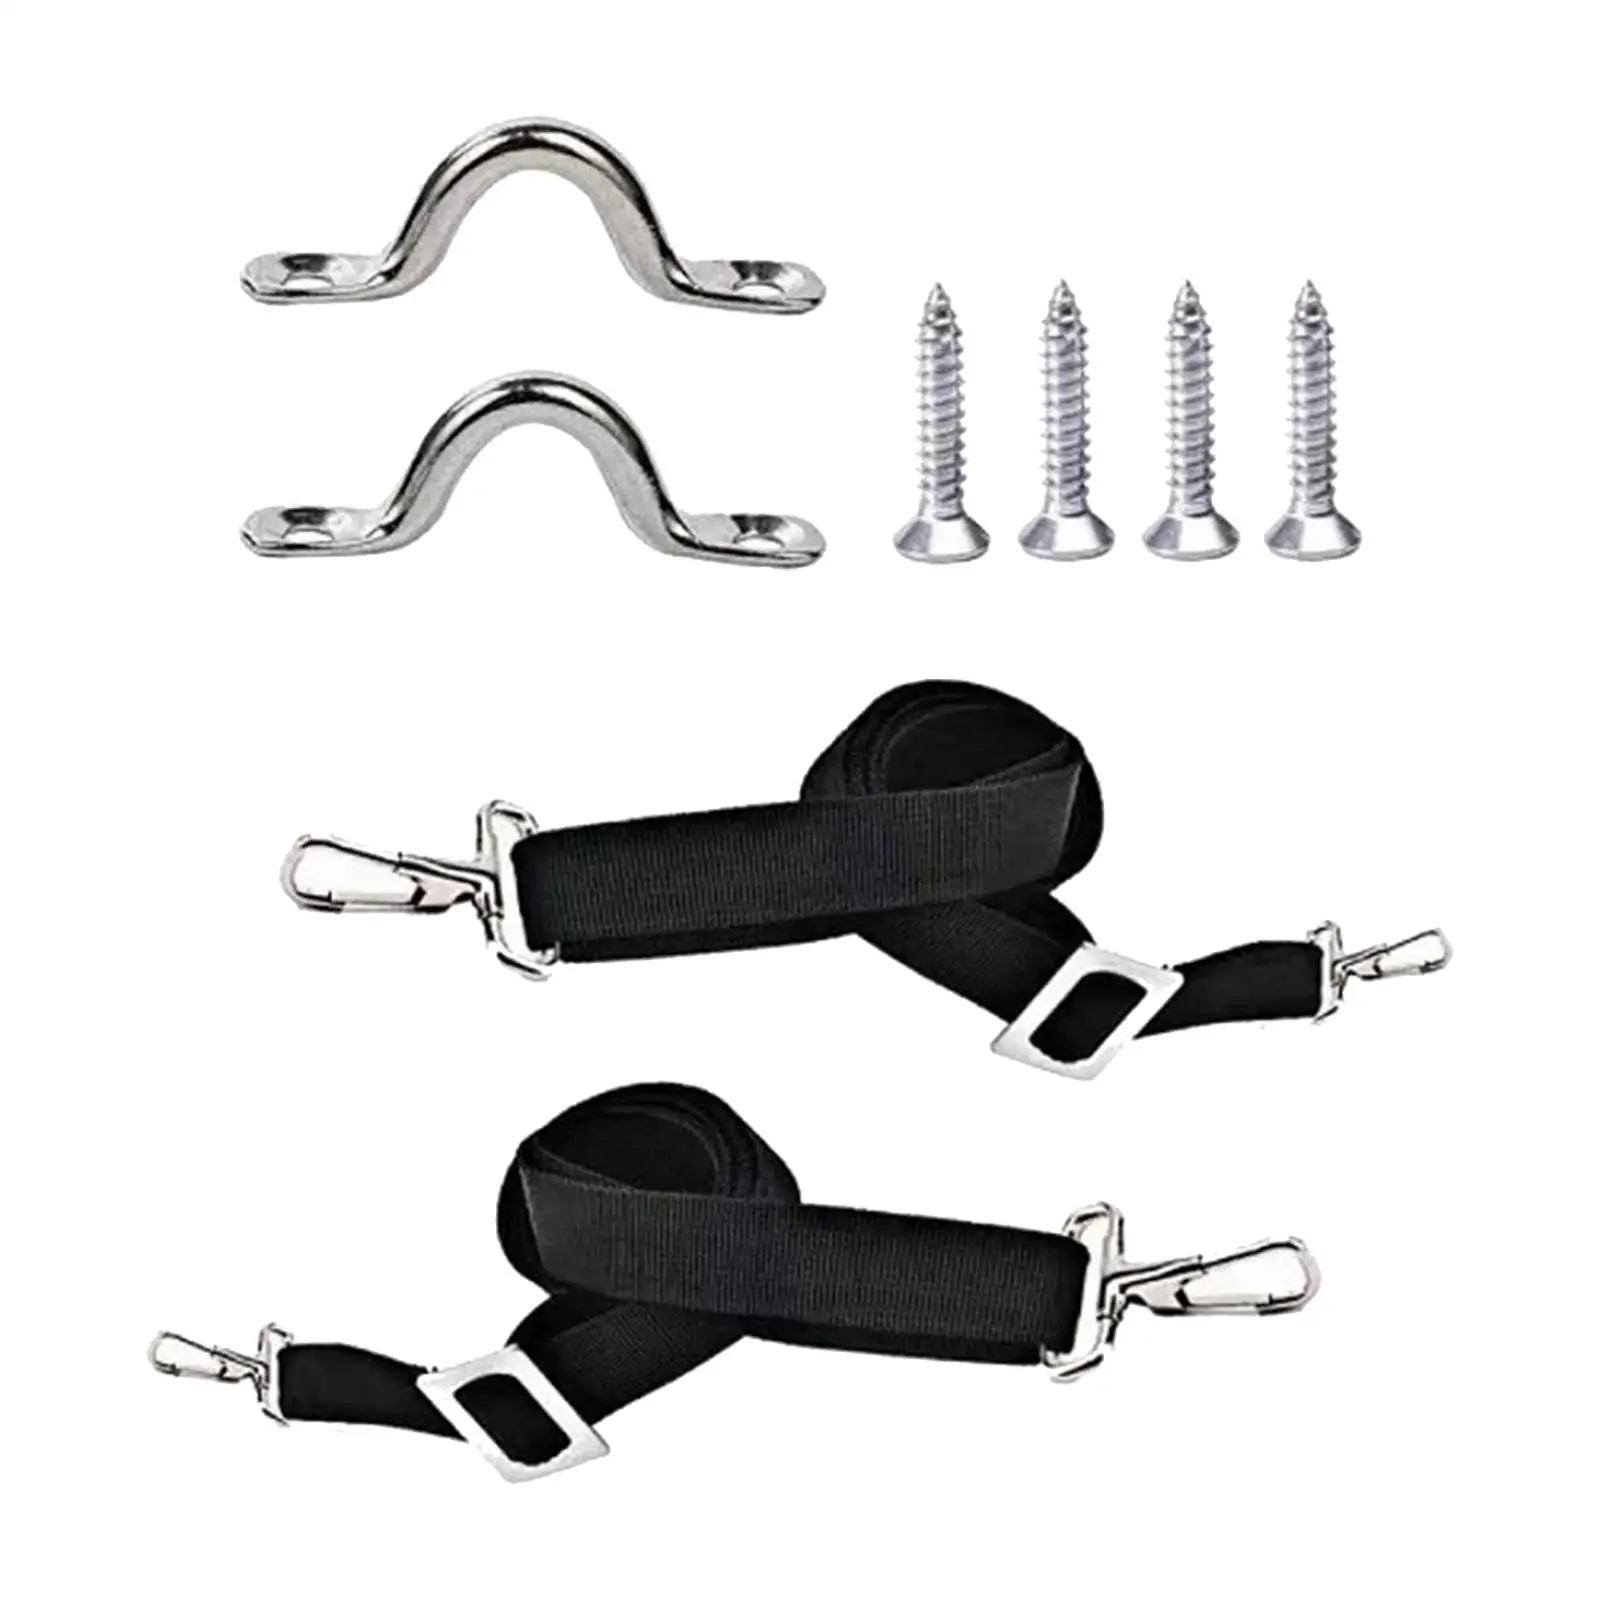 2 Adjustable Bimini Top Straps with Loop And Hook Awning Straps